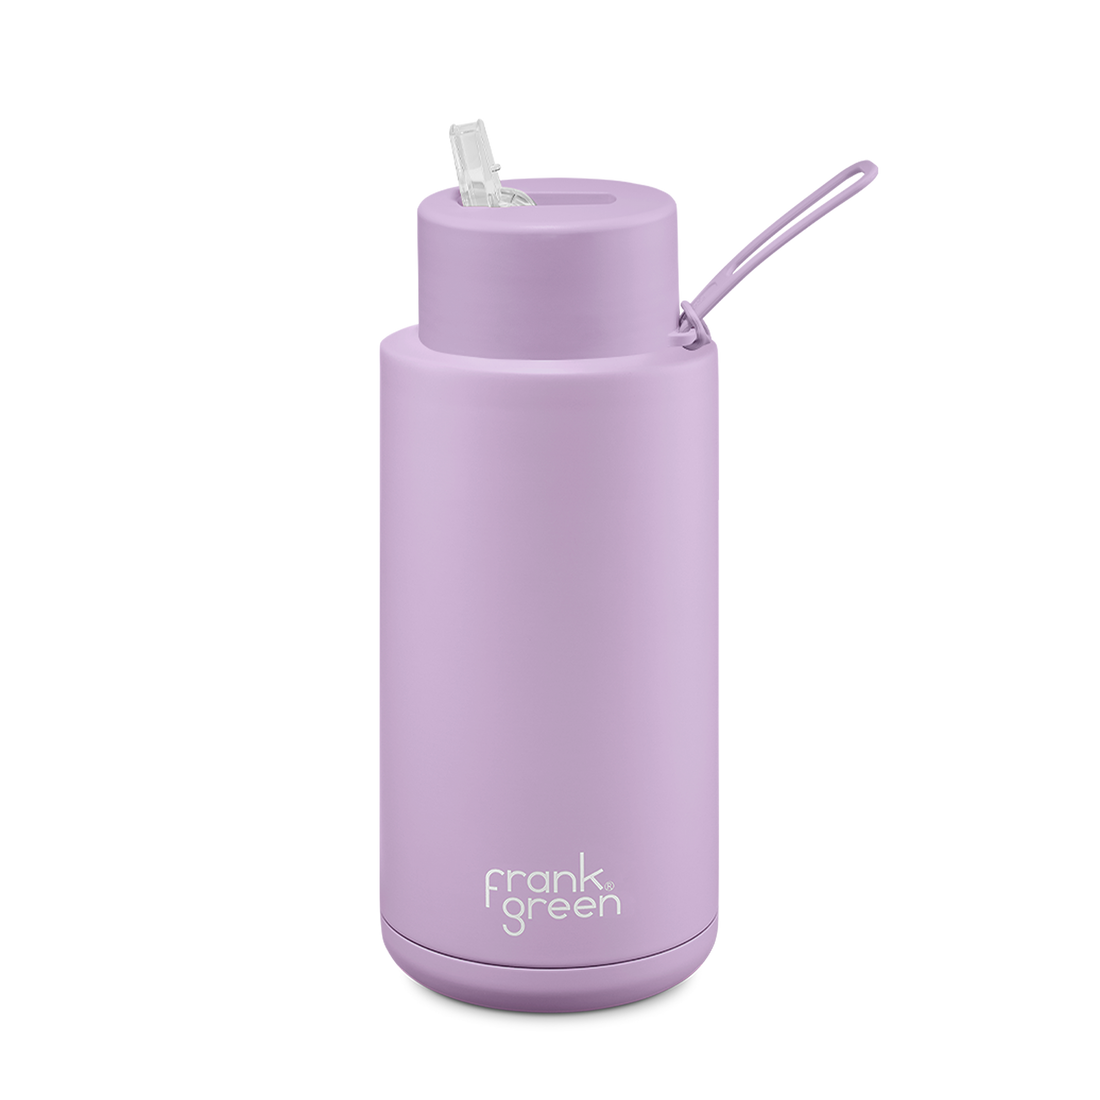 Frank Green - LIMITED EDITION 1 Litre Stainless Steel Ceramic Reusable Bottle in Lilac